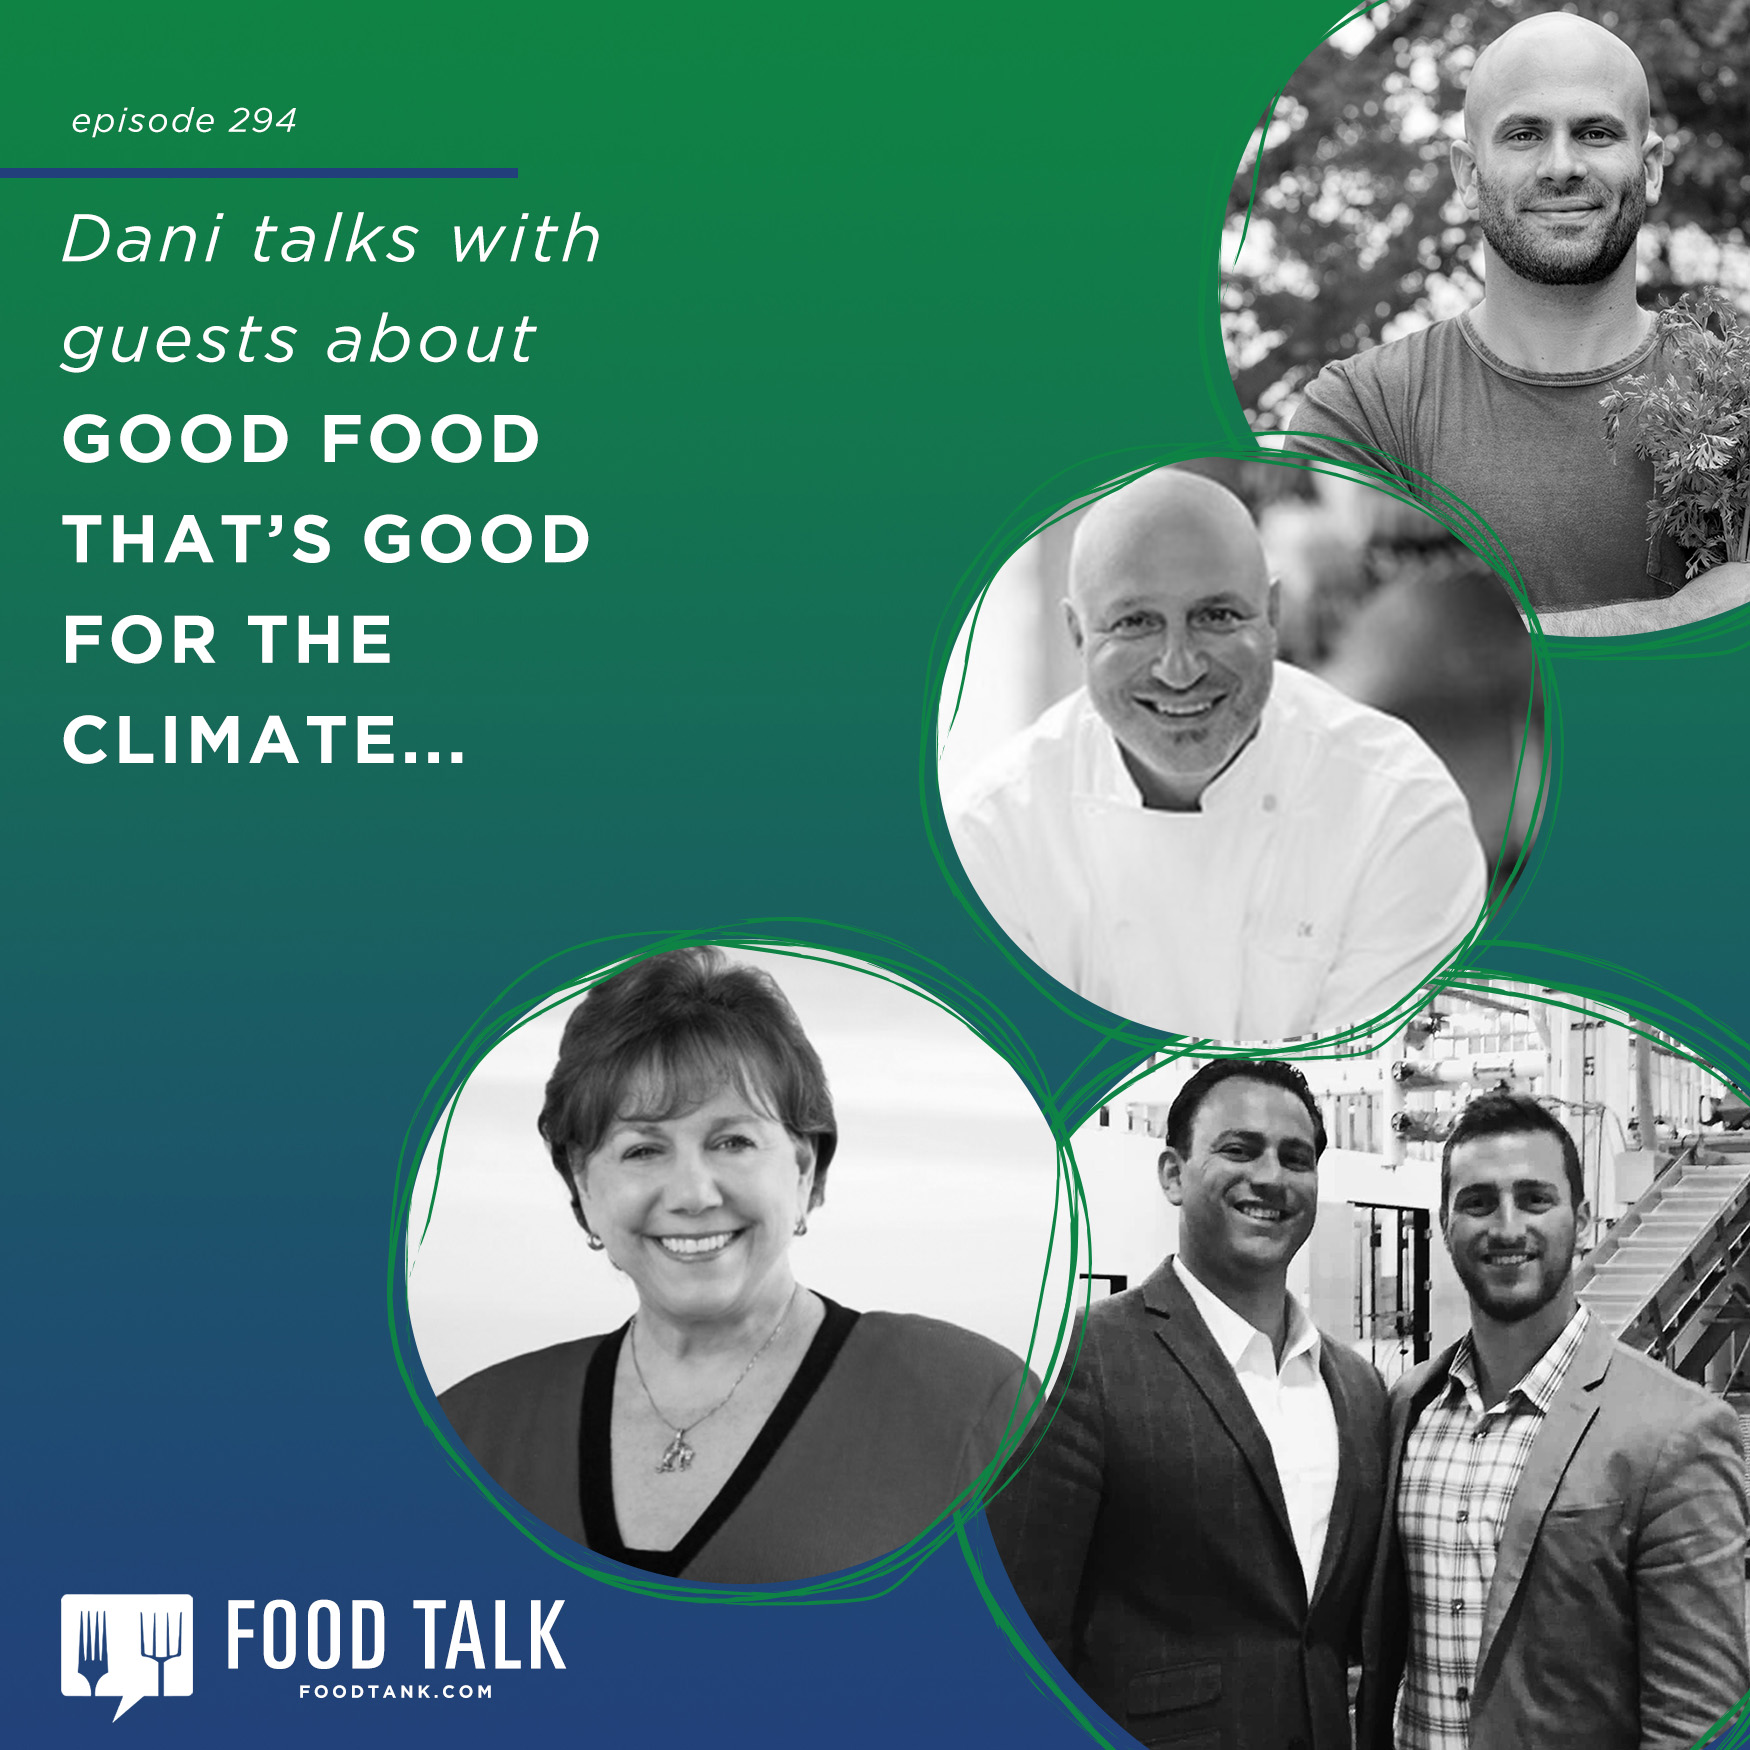 https://podcasts.apple.com/us/podcast/294-good-food-thats-good-for-climate/id1434128568?i=1000544404713